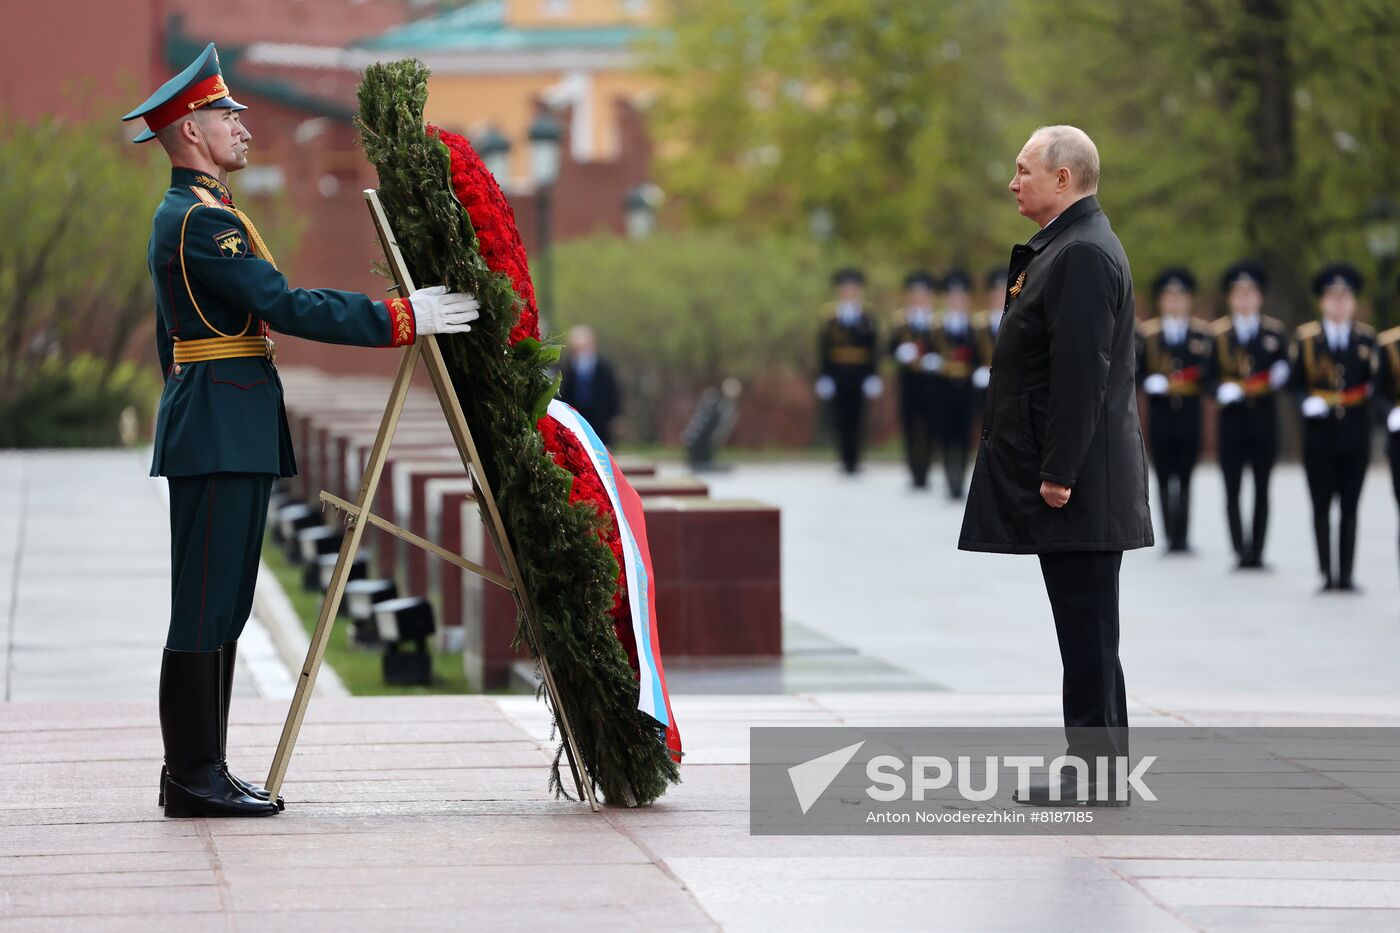 Russia Putin Victory Day Parade Wreath Laying